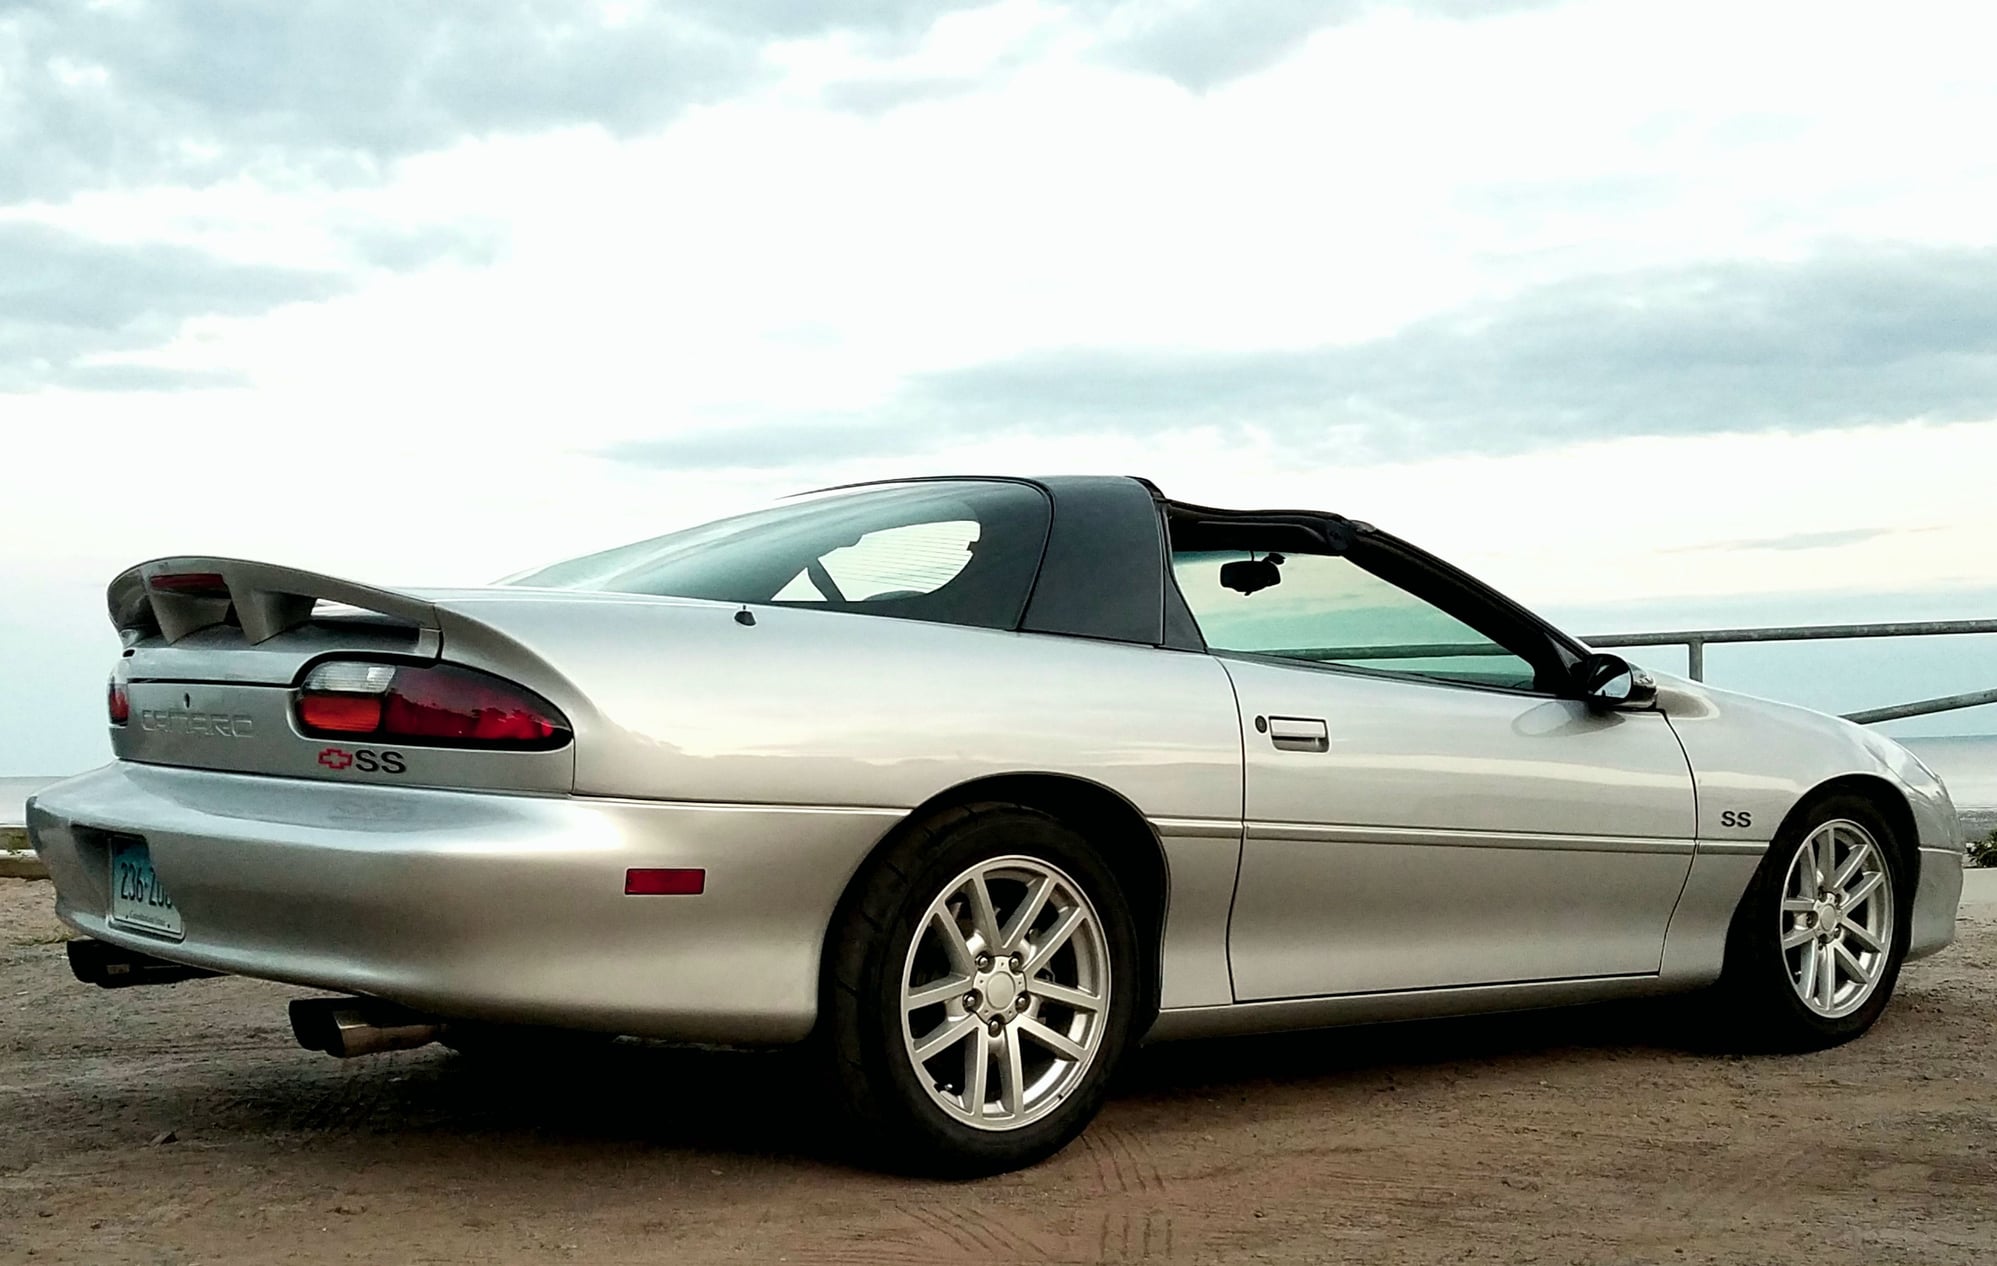 1999 Chevrolet Camaro - 1999 Chevrolet Camaro SS 26K MILES! - Used - VIN 2G1FP22GXX2140375 - 26,000 Miles - 8 cyl - 2WD - Manual - Coupe - Silver - Shelton, CT 06484, United States